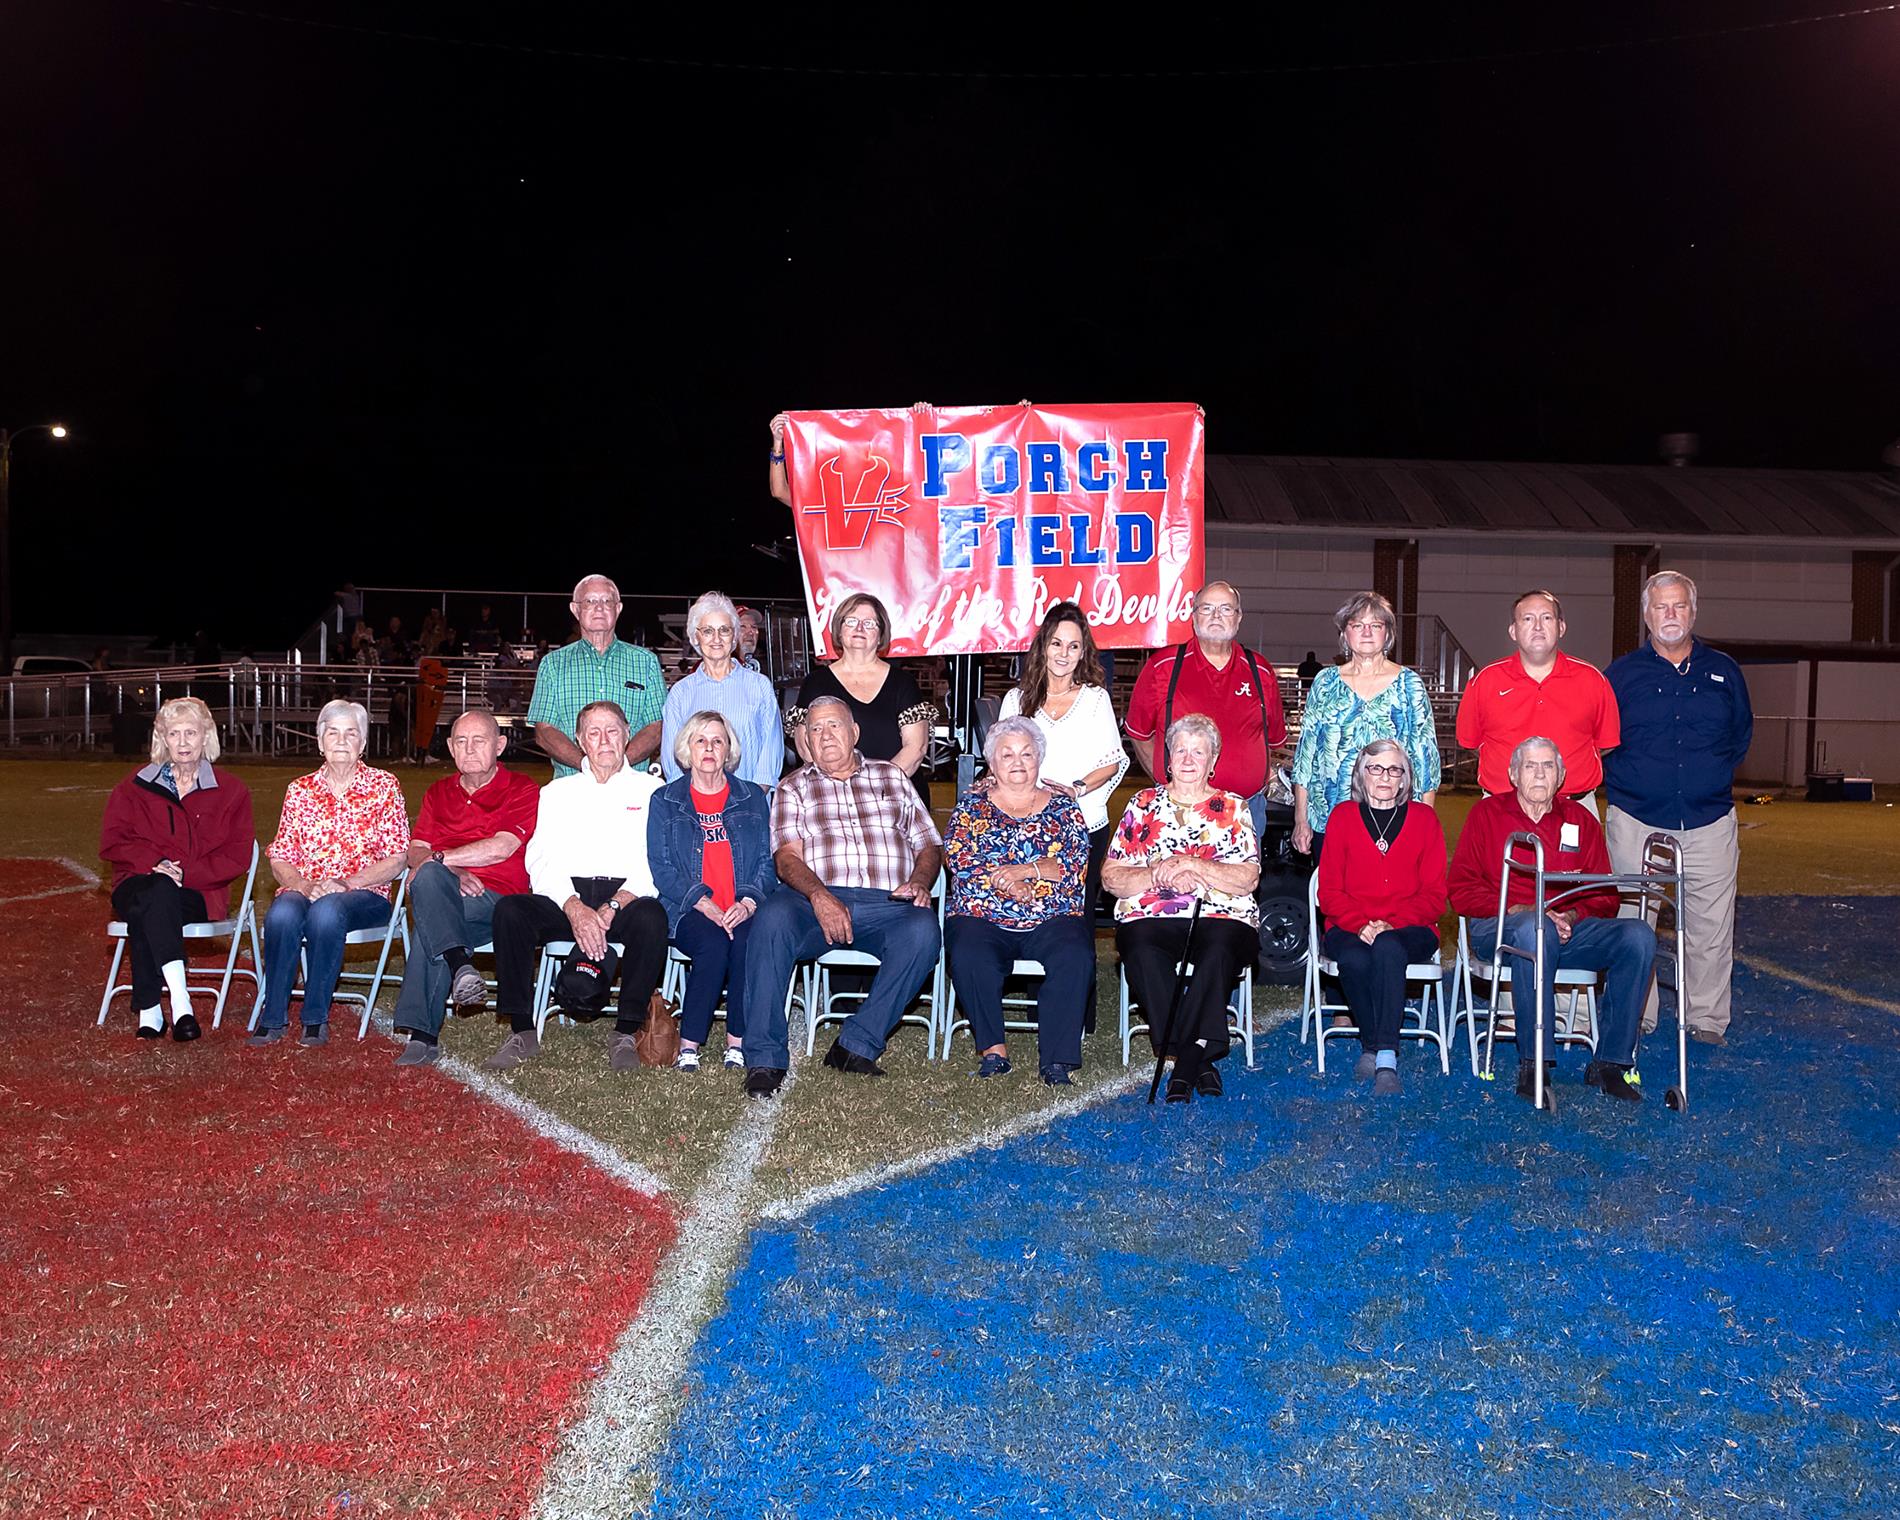 Former players, cheerleaders and family members of Coach JR Porch